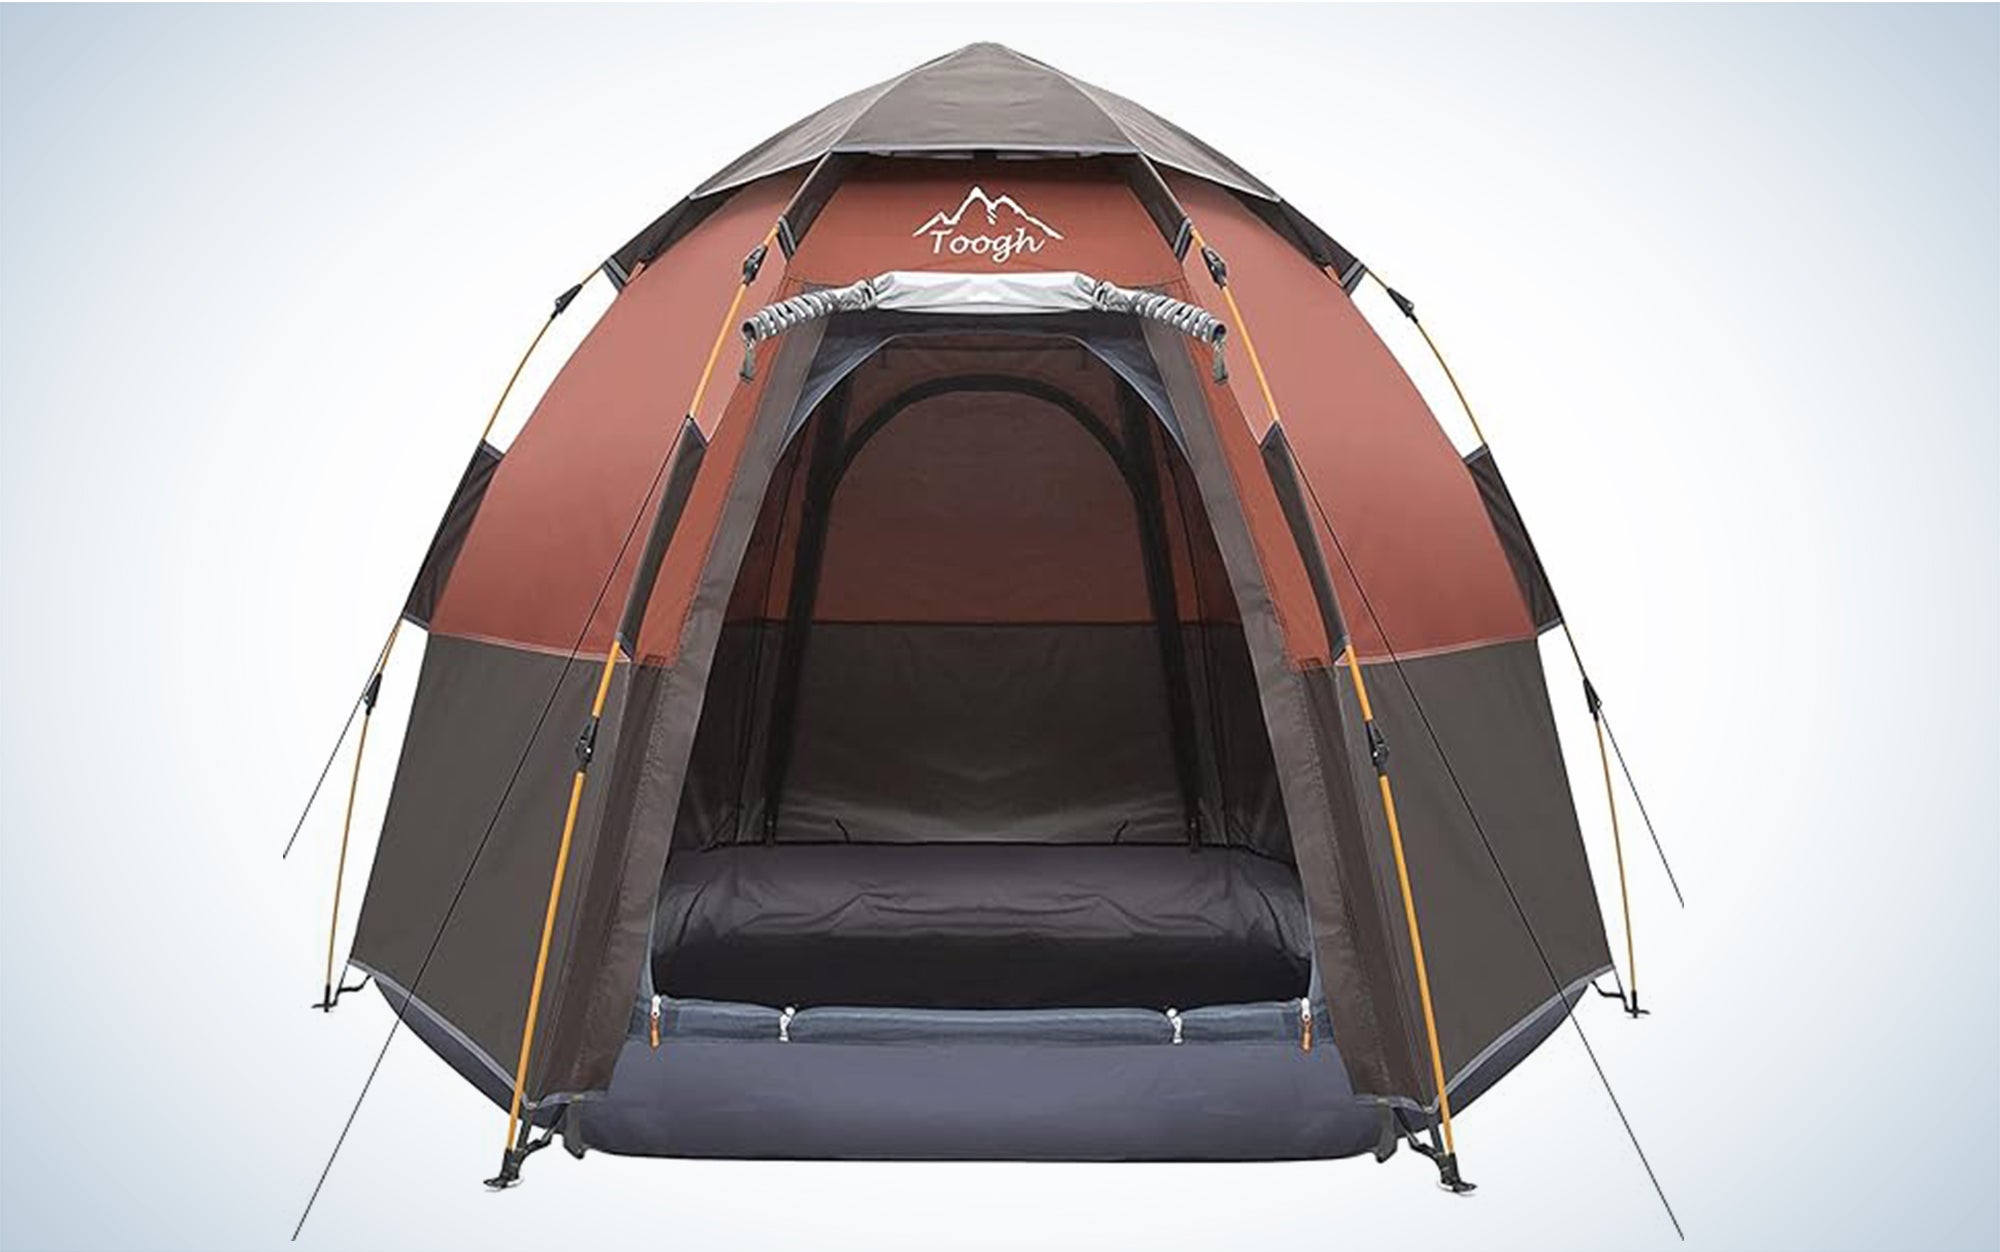 We tested the Toogh 3-4 Person Tent.